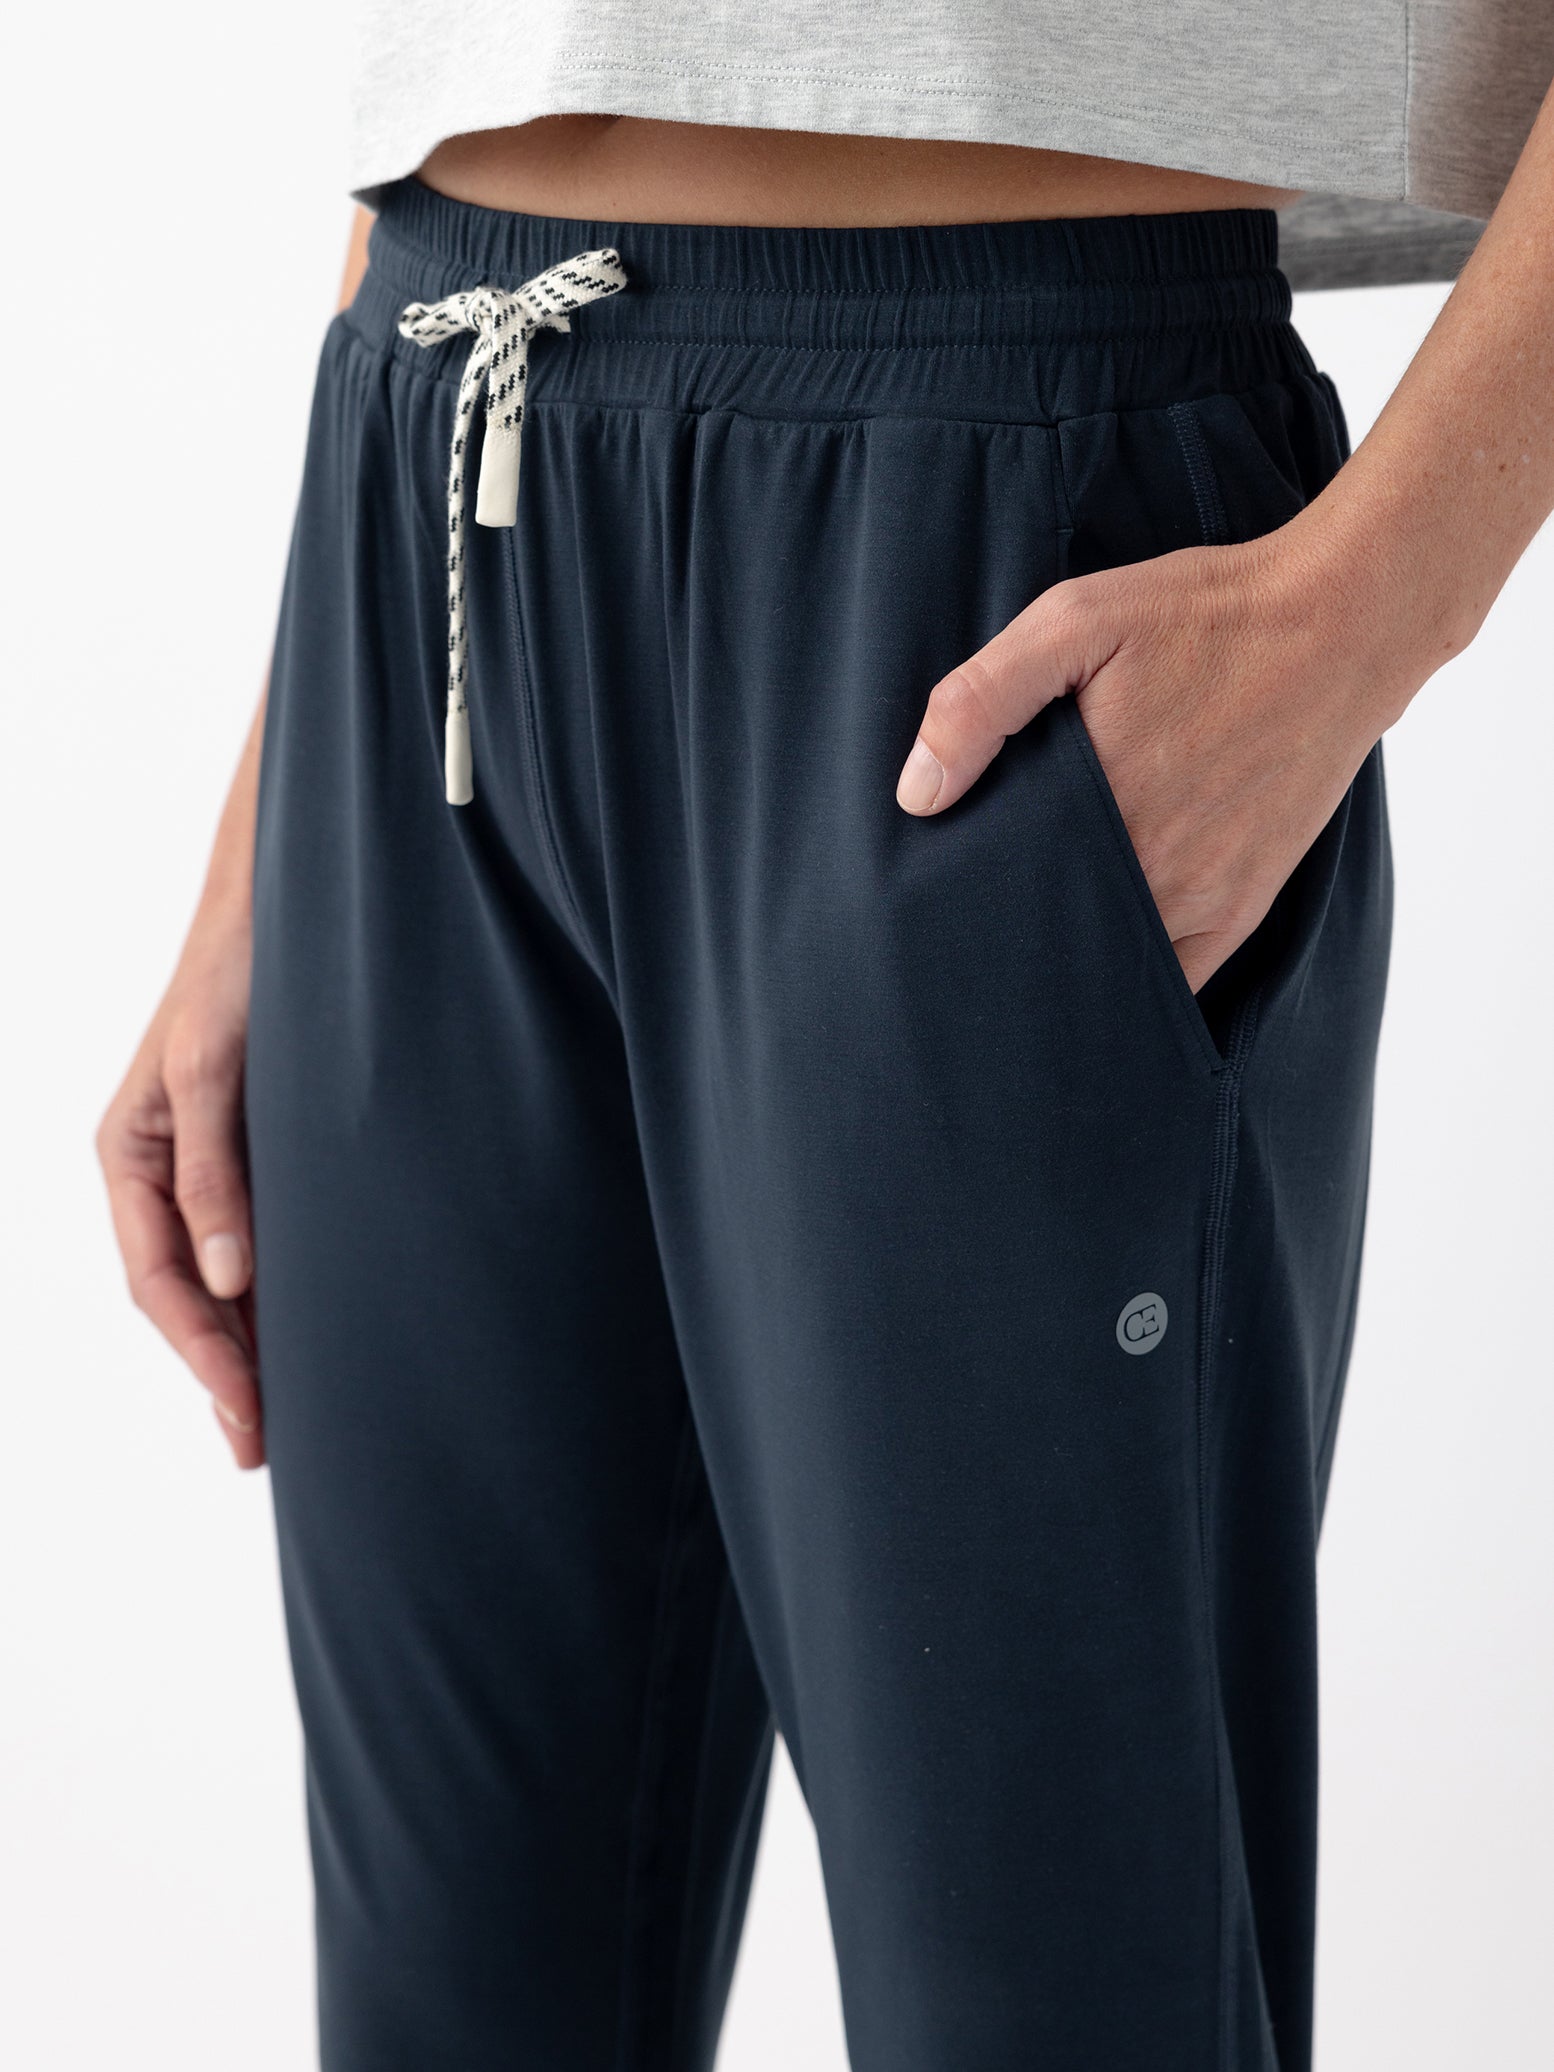 Eclipse Studio Jogger. The Studio Joggers are worn by a woman photographed with a white background. 